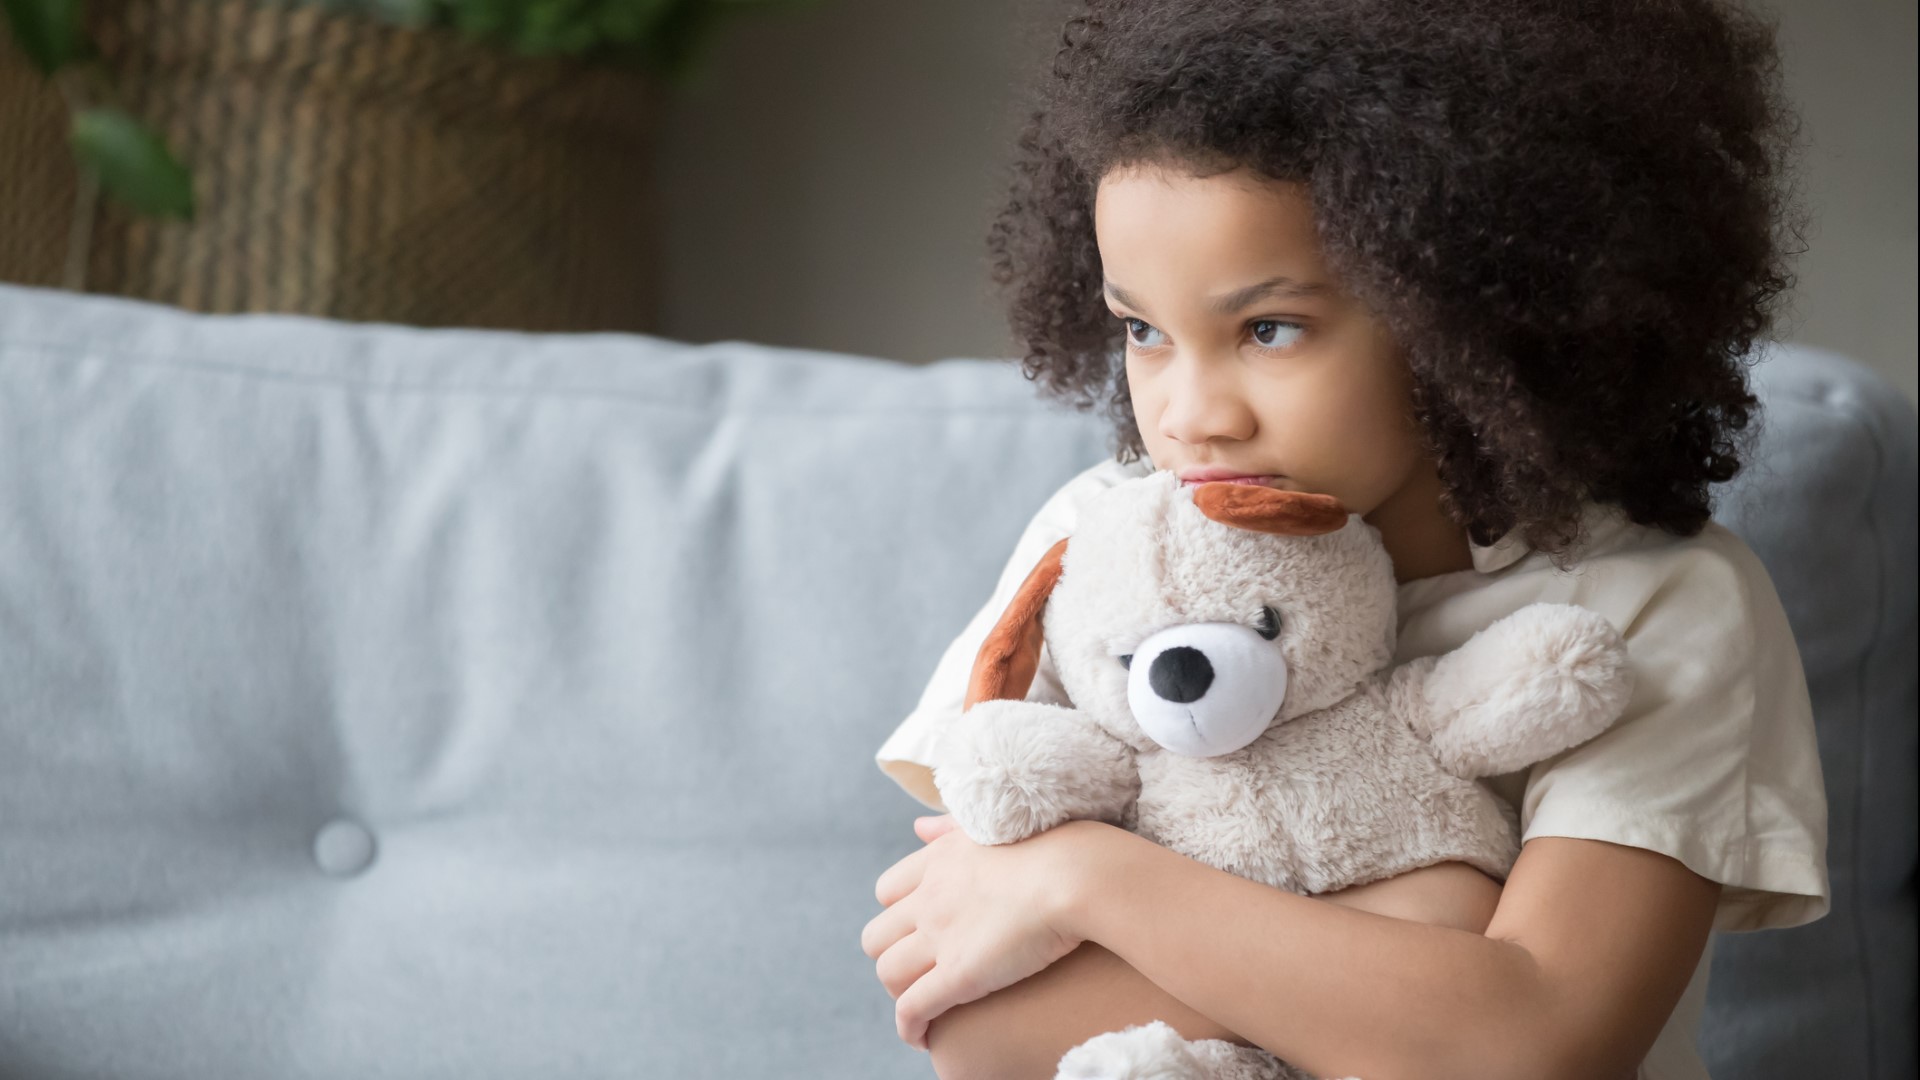 Pediatrician Dr. Chris Ladish on the various ways the coronavirus crisis impacts children and behavior changes to watch for in different age groups.